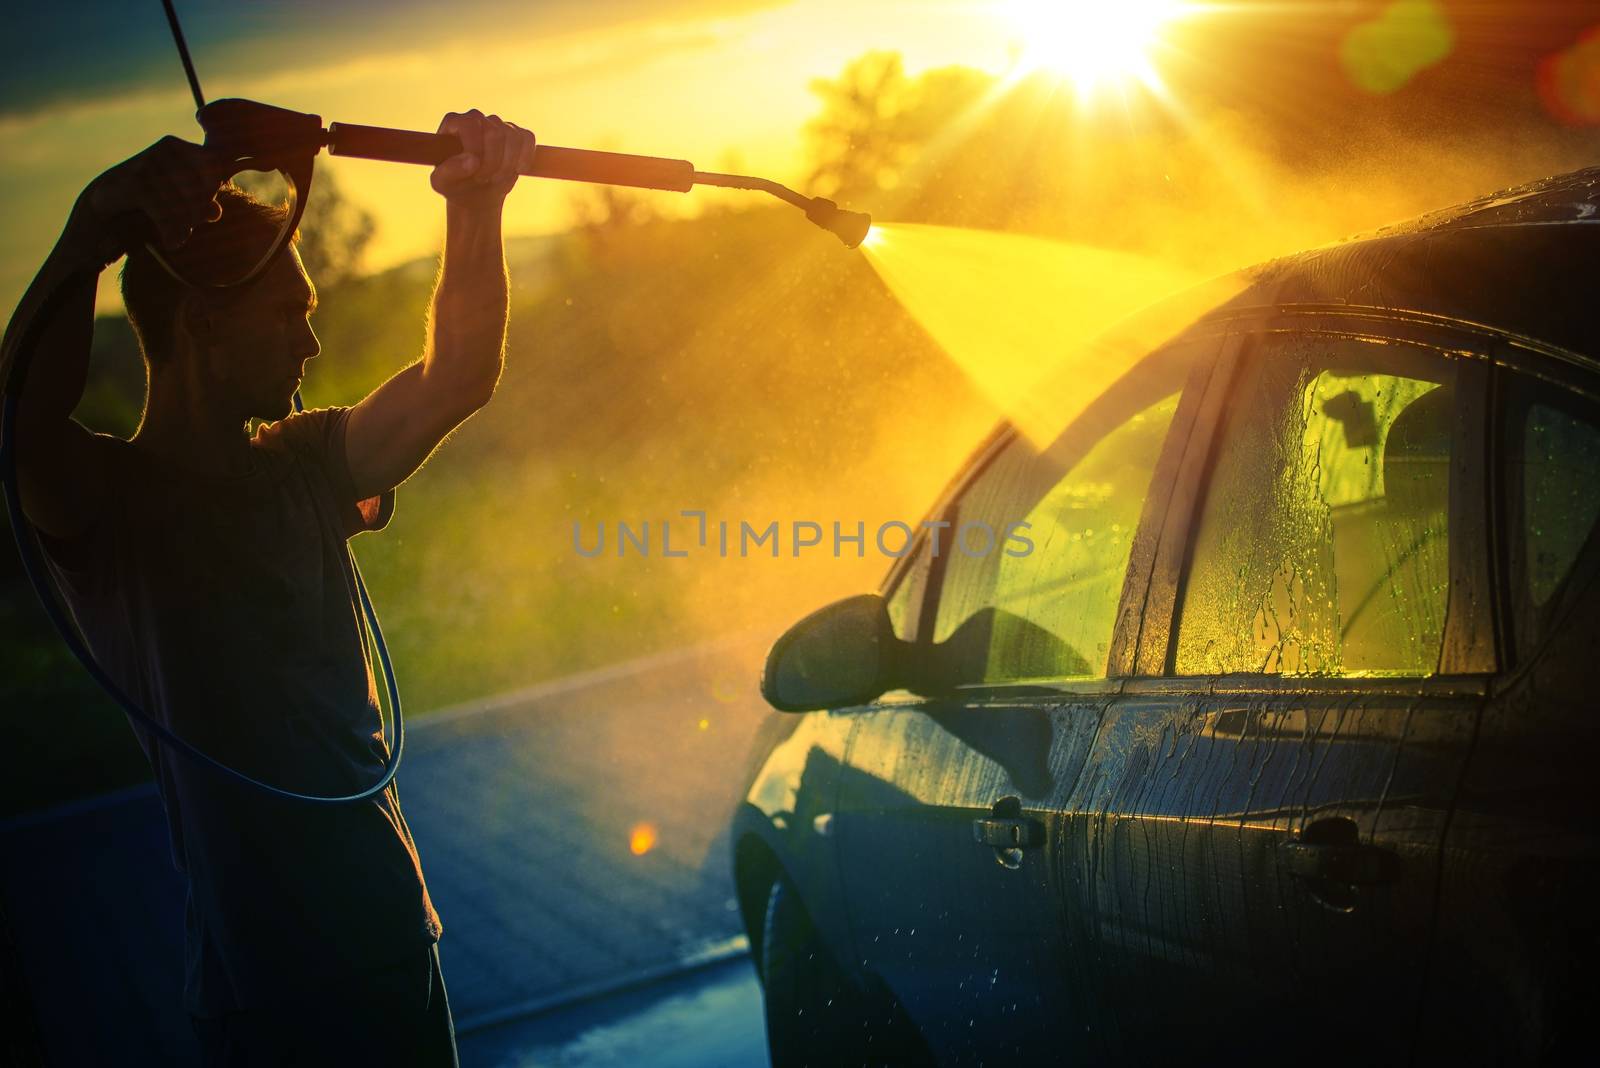 Car Washing at Sunset by welcomia